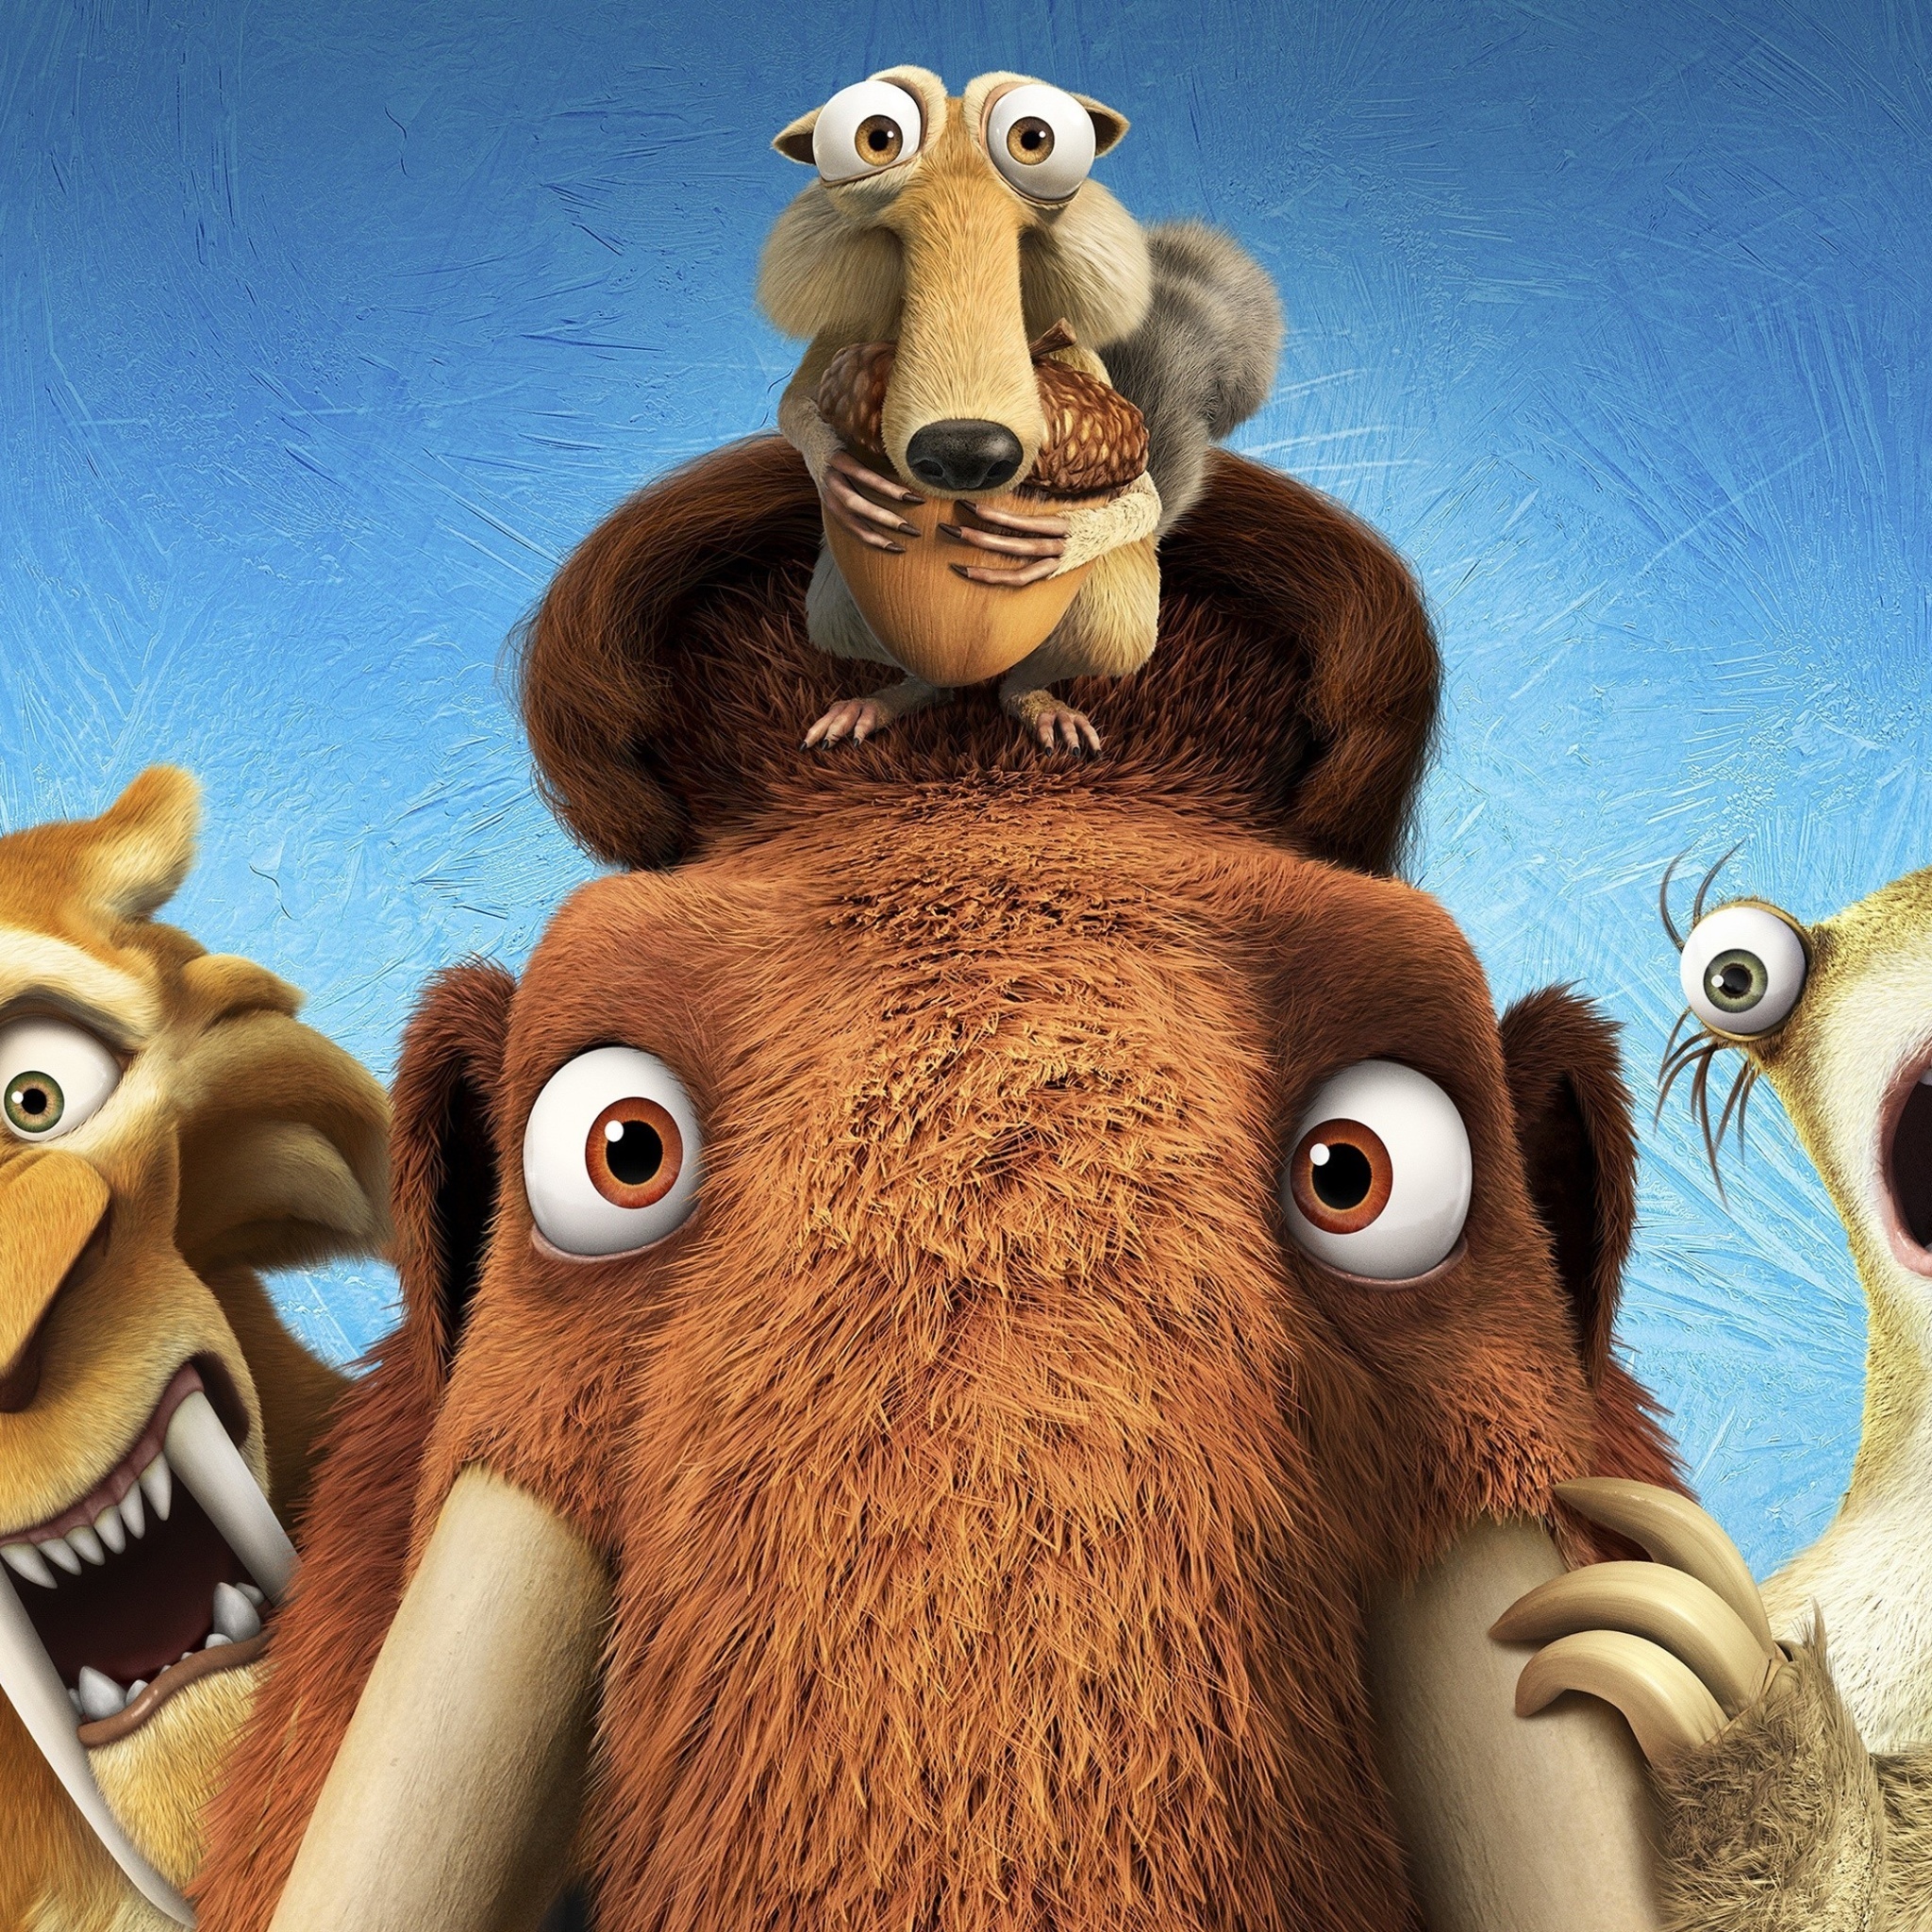 Das Ice Age 5 Collision Course with Diego, Manny, Scrat, Sid, Mammoths Wallpaper 2048x2048